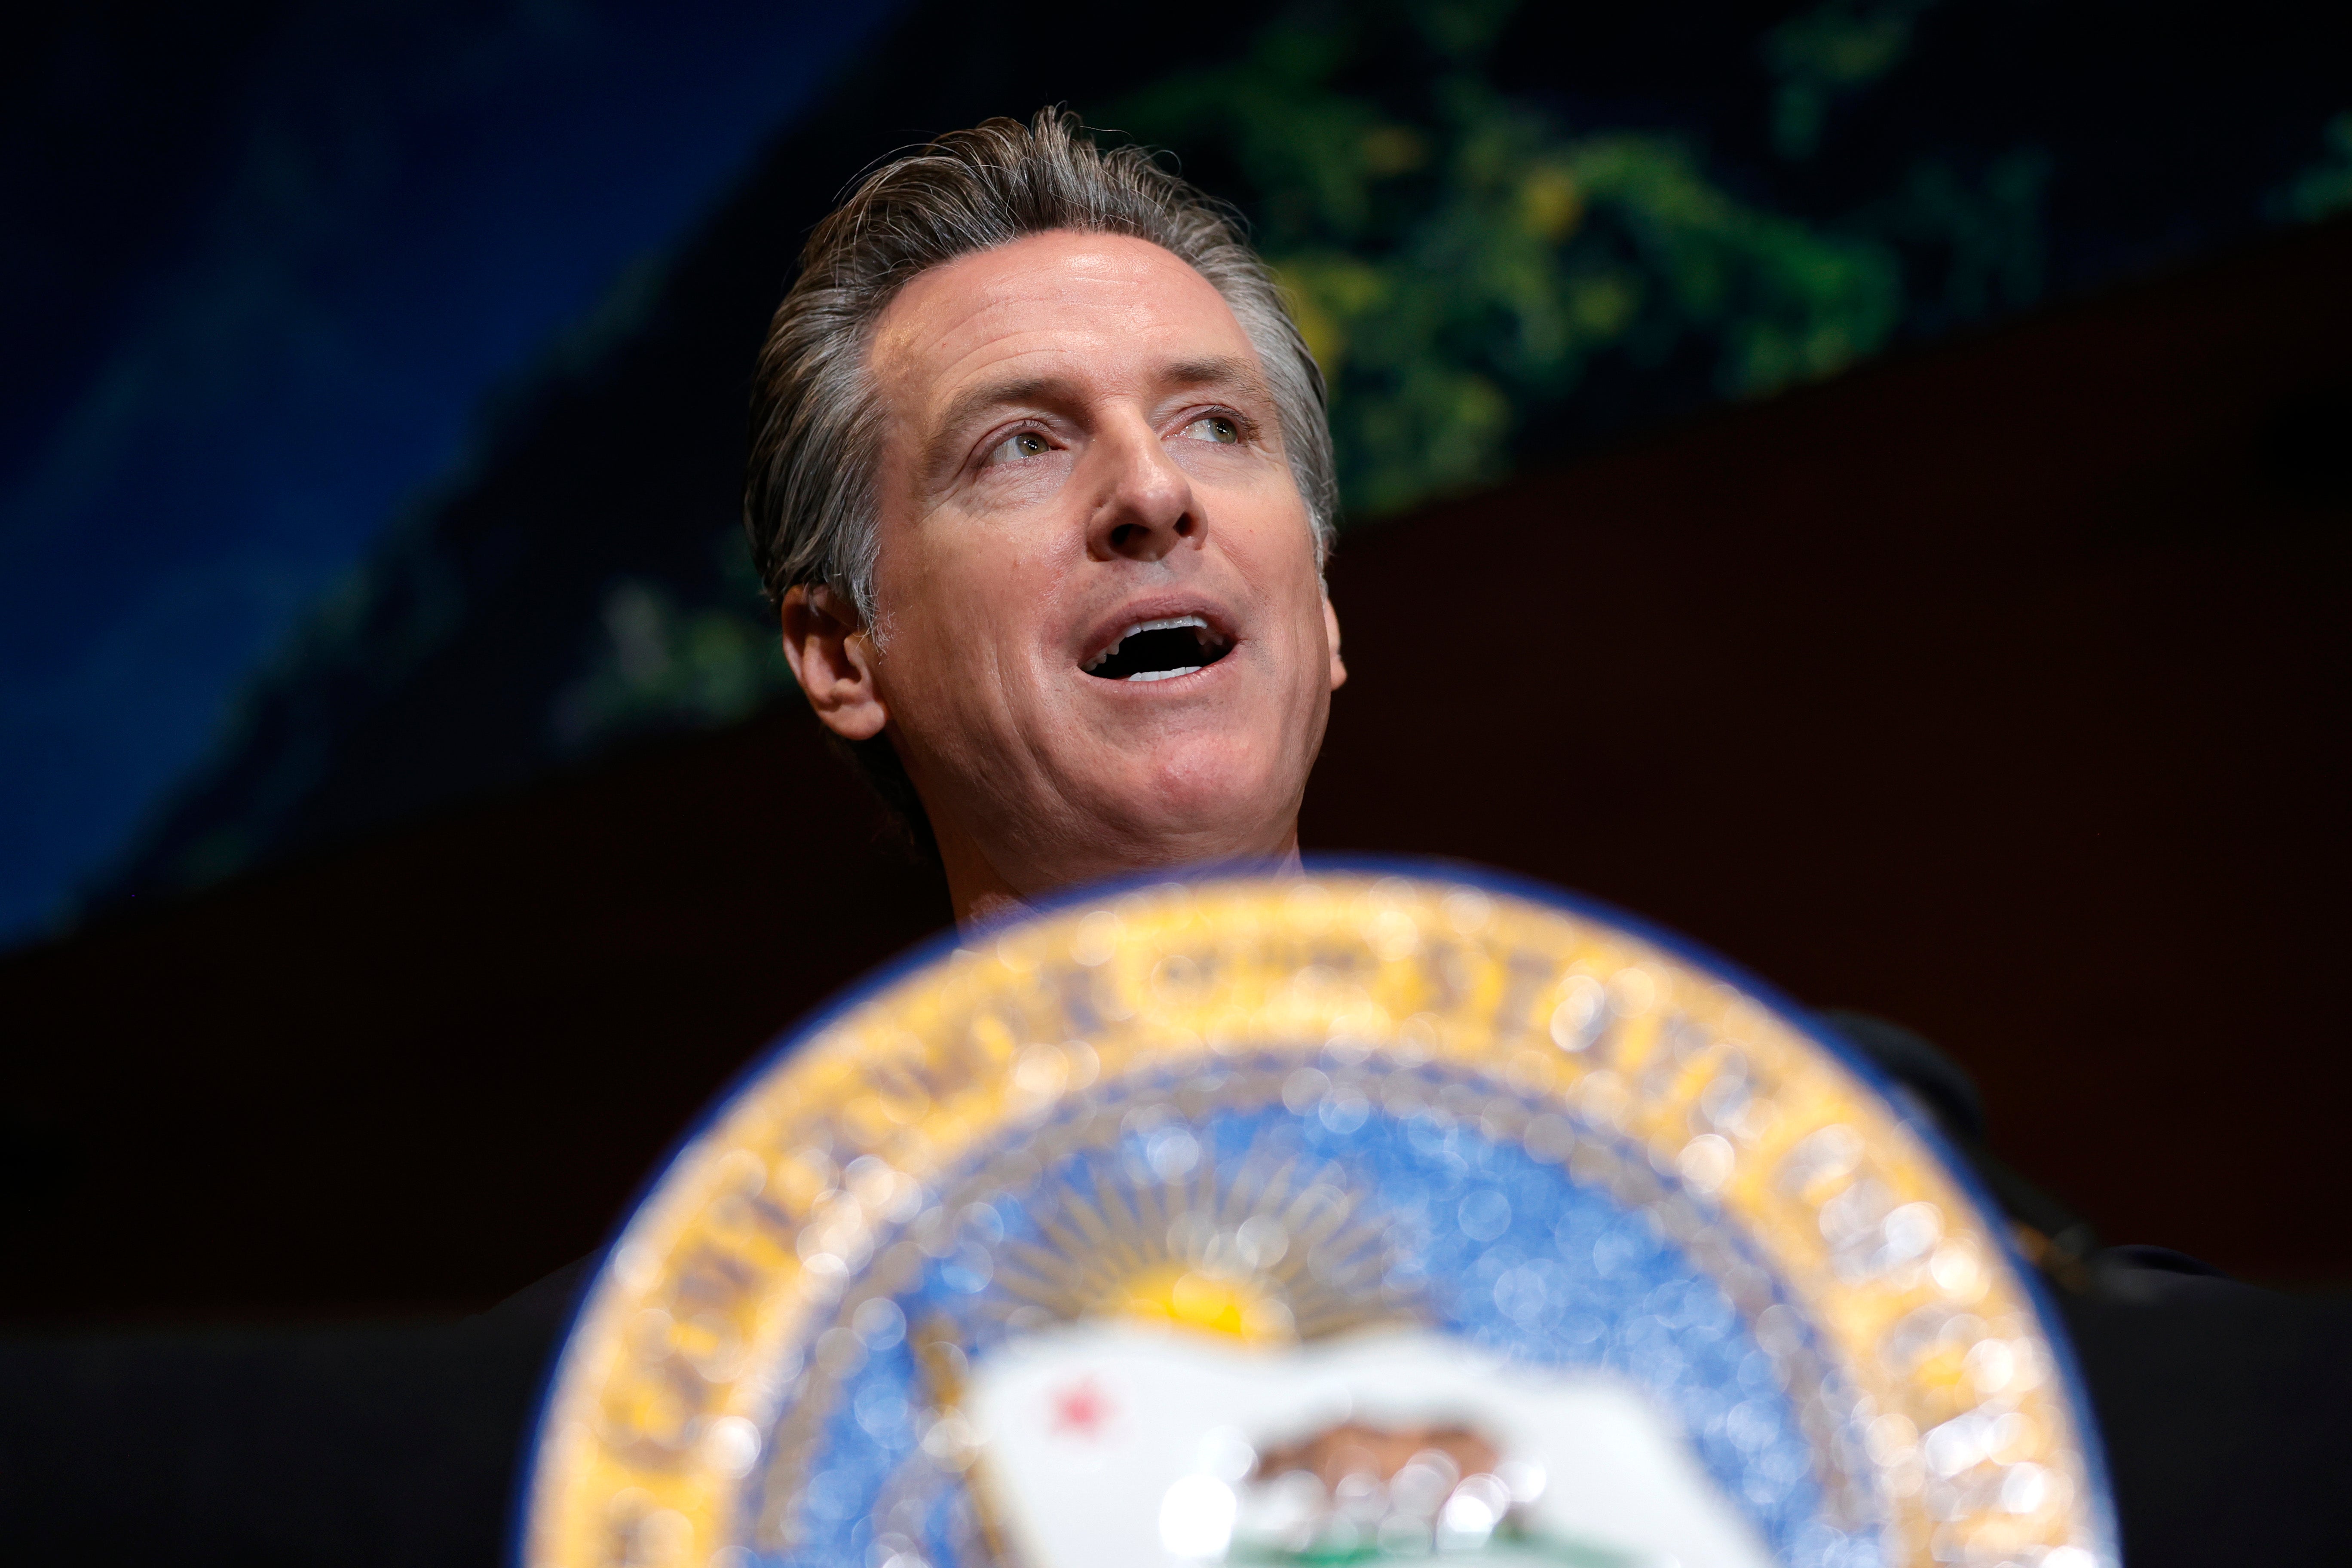 Gavin Newsom’s apology comes after he beat back a recall effort by Republicans last year